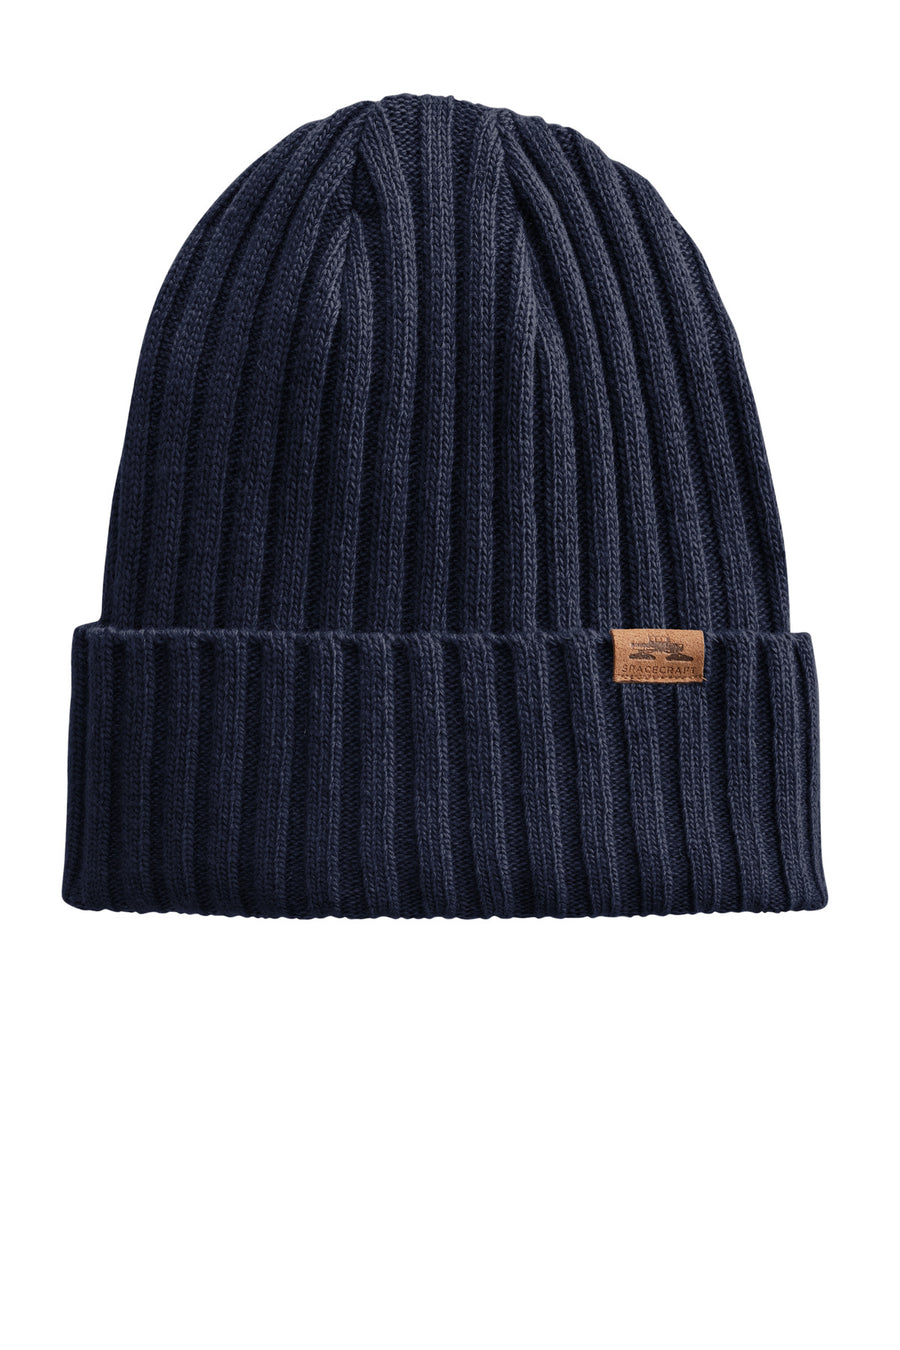 LIMITED EDITION Spacecraft Square Knot Beanie